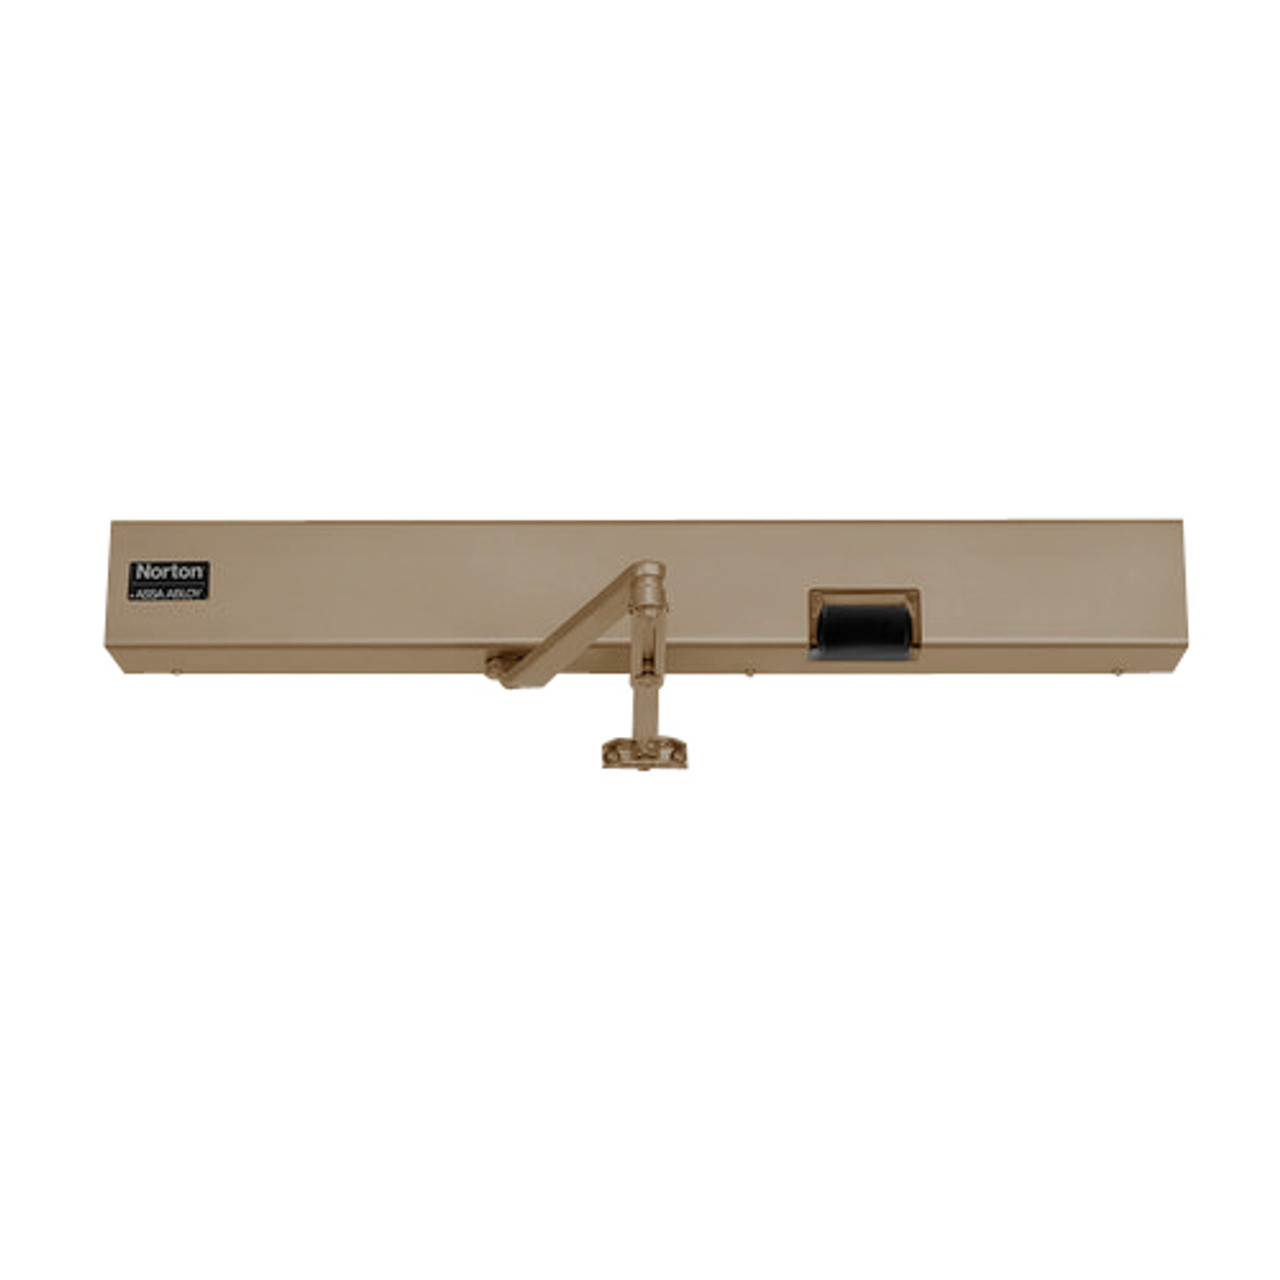 7134SZ-LH-120VAC-691 Norton 7100SZ Series Safe Zone Multi-Point Closer/Holder with Motion Sensor and Push Side Double Lever 13-1/2 inch Main Arm in Dull Bronze Finish